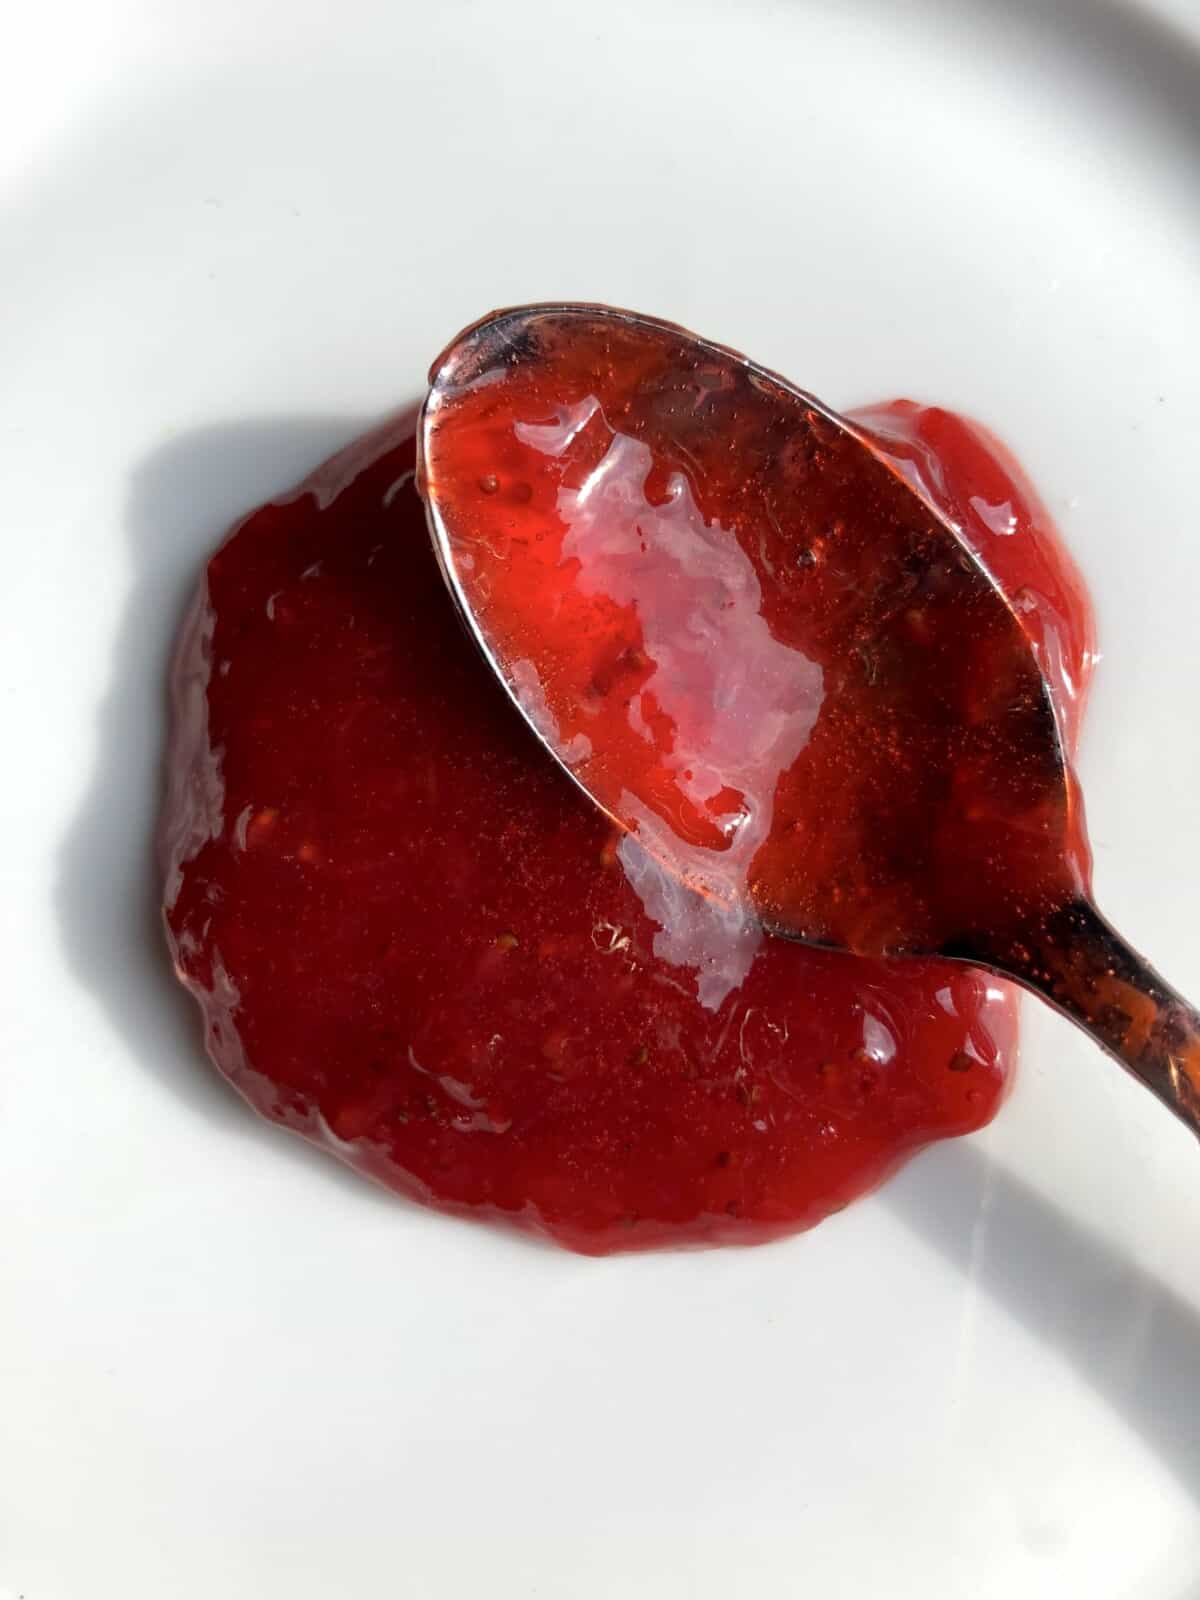 a spoon full of strawberry jam on a plate